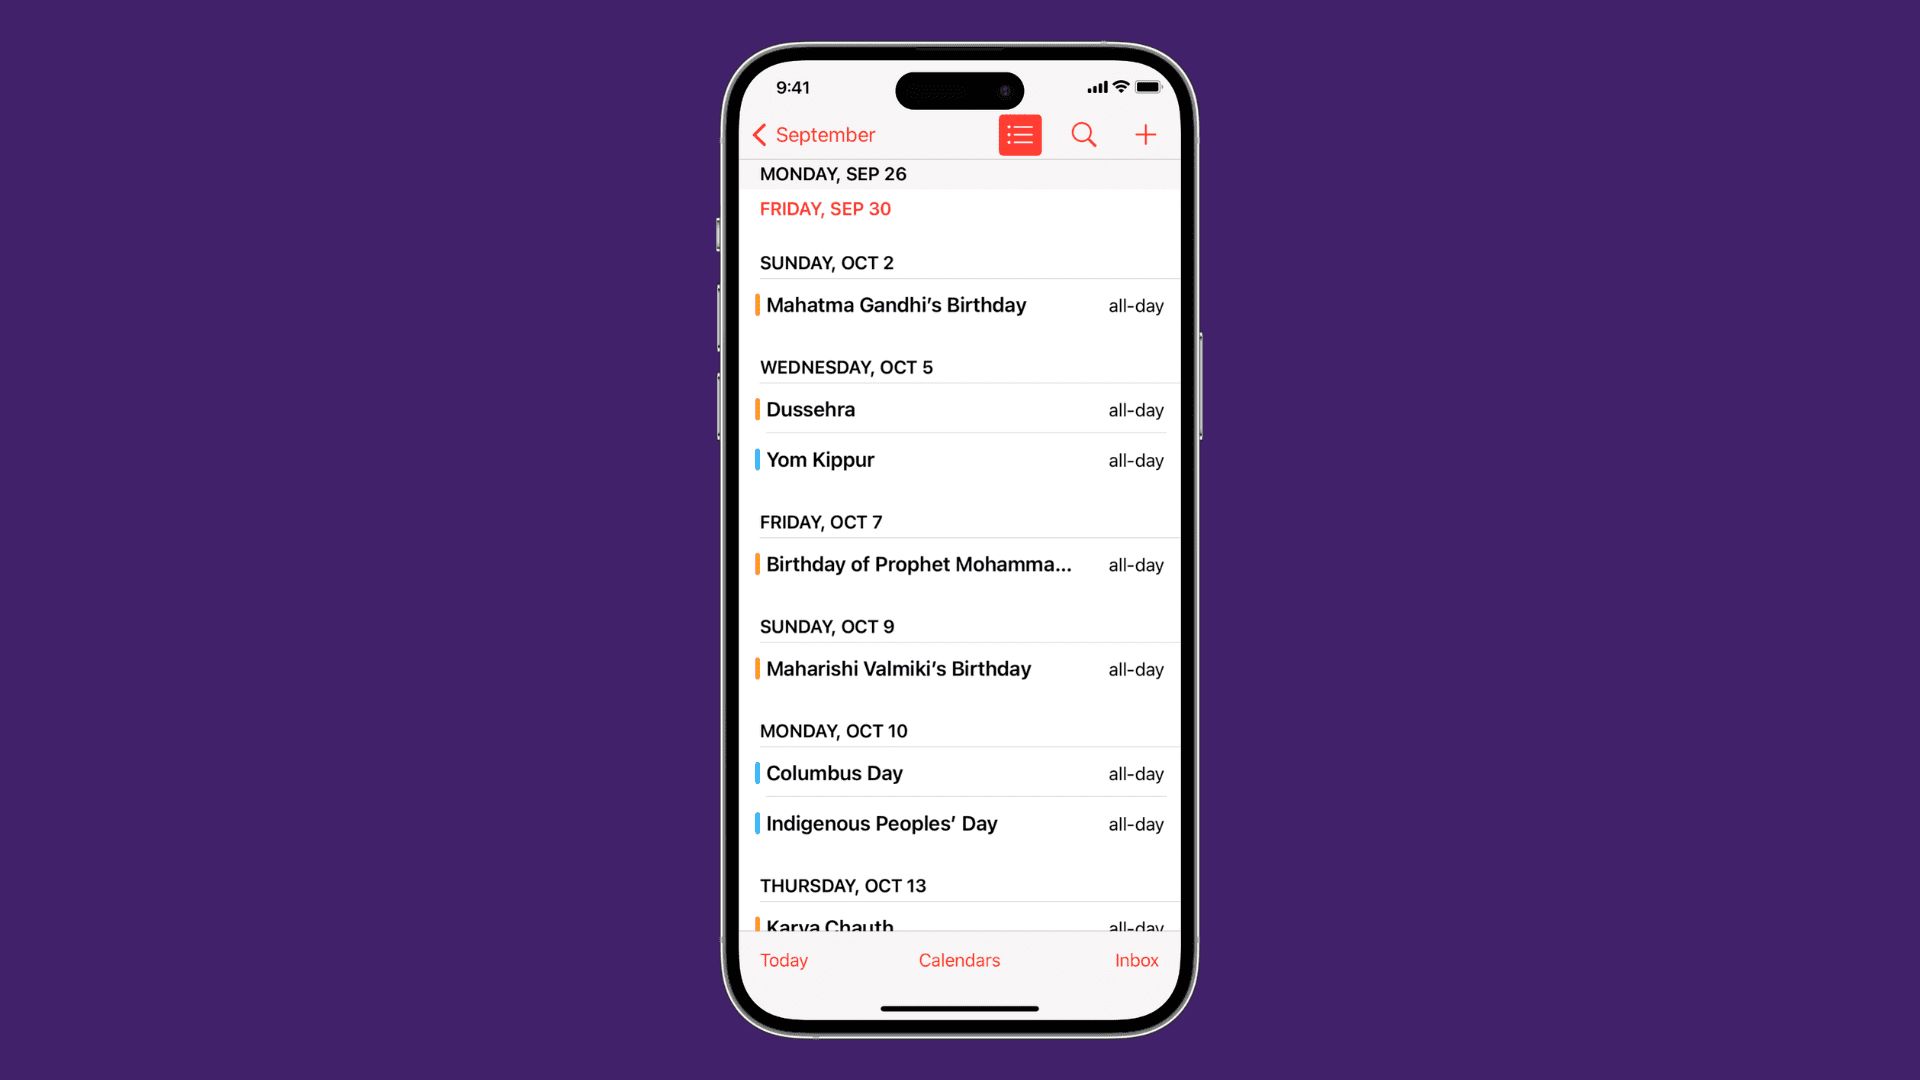 how-to-search-events-in-the-calendar-app-on-iphone-ipad-2022